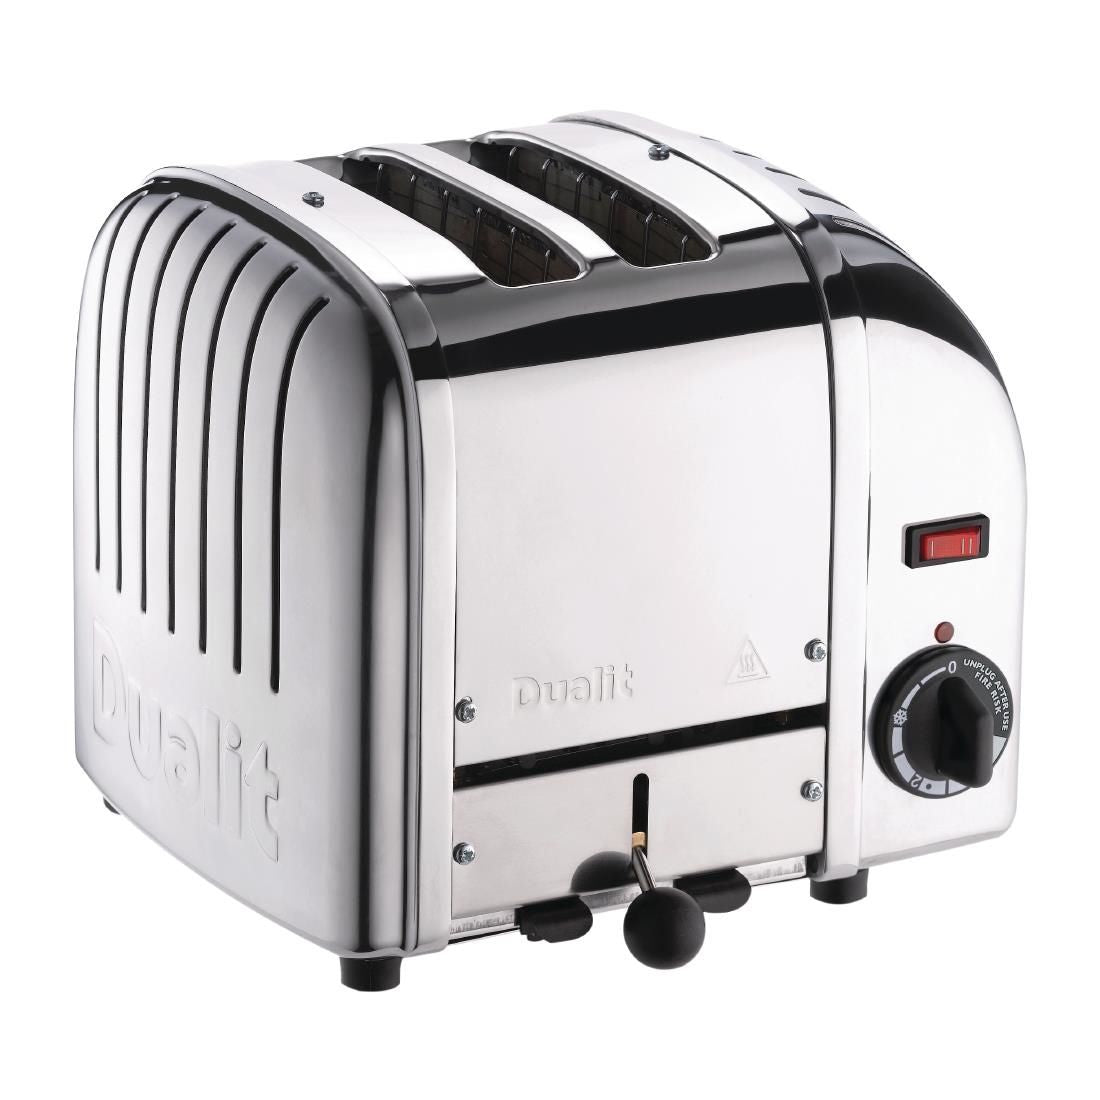 F208 Dualit 2 Slice Vario Toaster Stainless Steel 20245 JD Catering Equipment Solutions Ltd